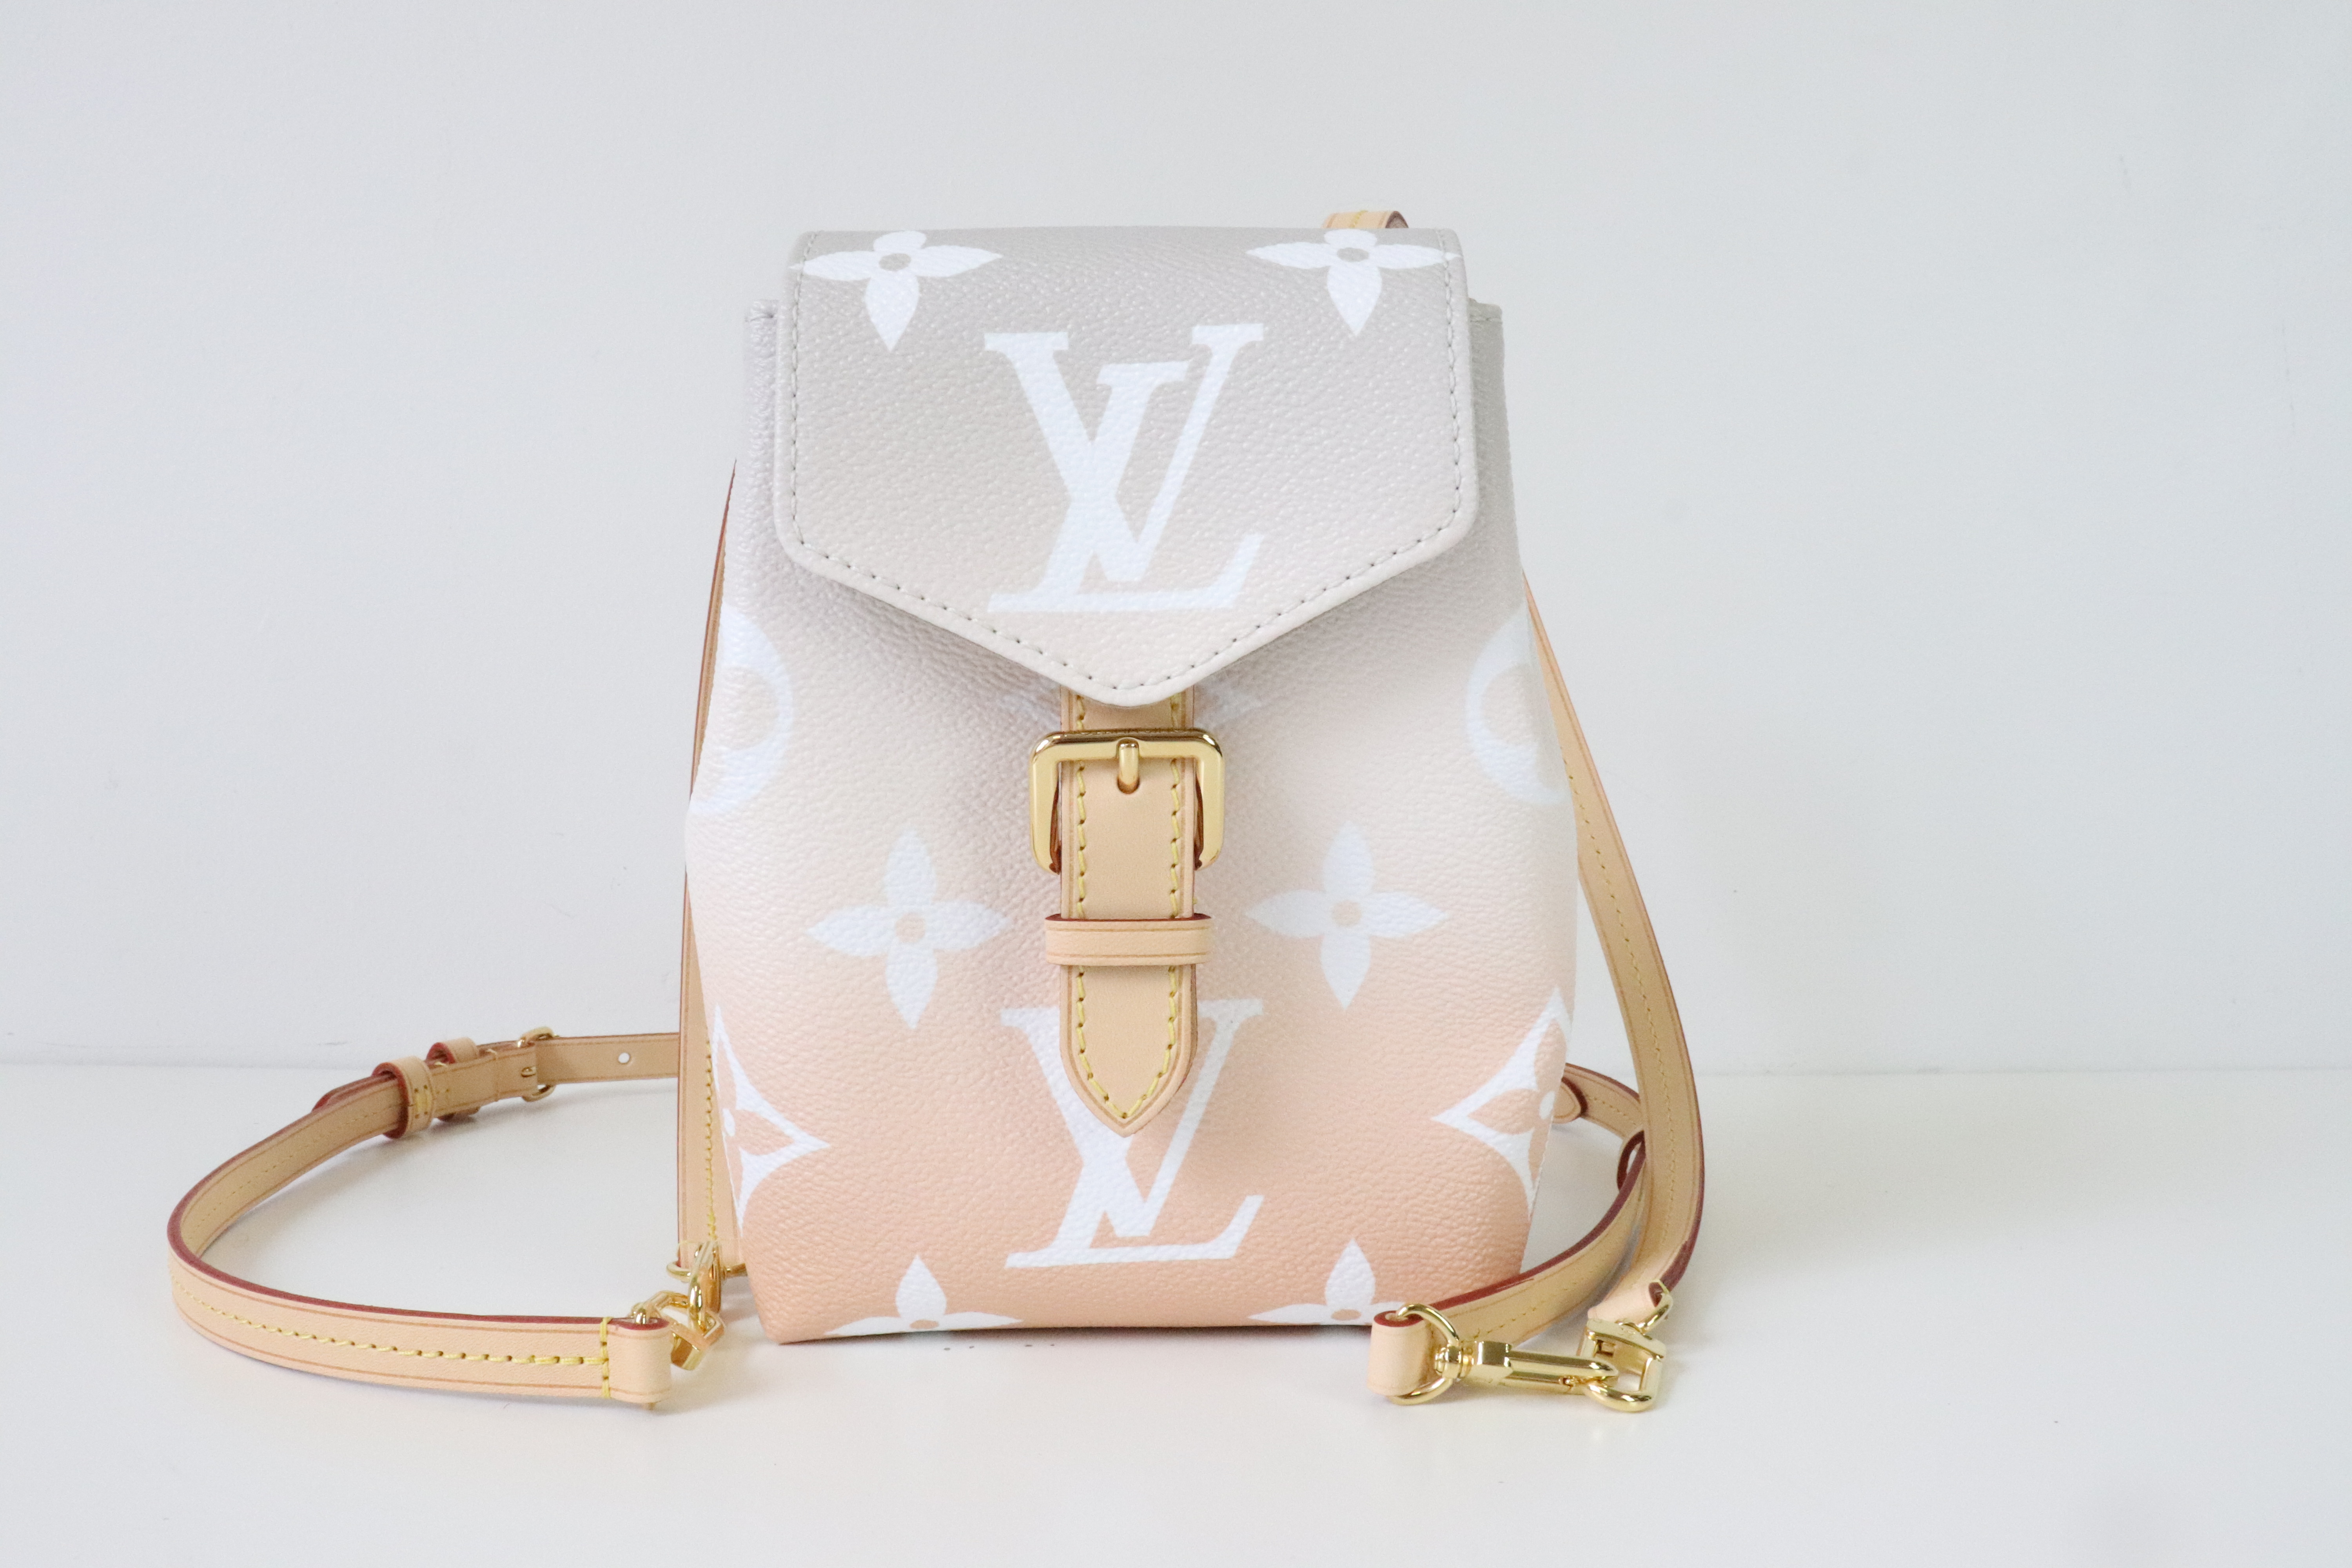 Louis Vuitton By the Pool Mini Backpack, New in Dustbag - Julia Rose Boston